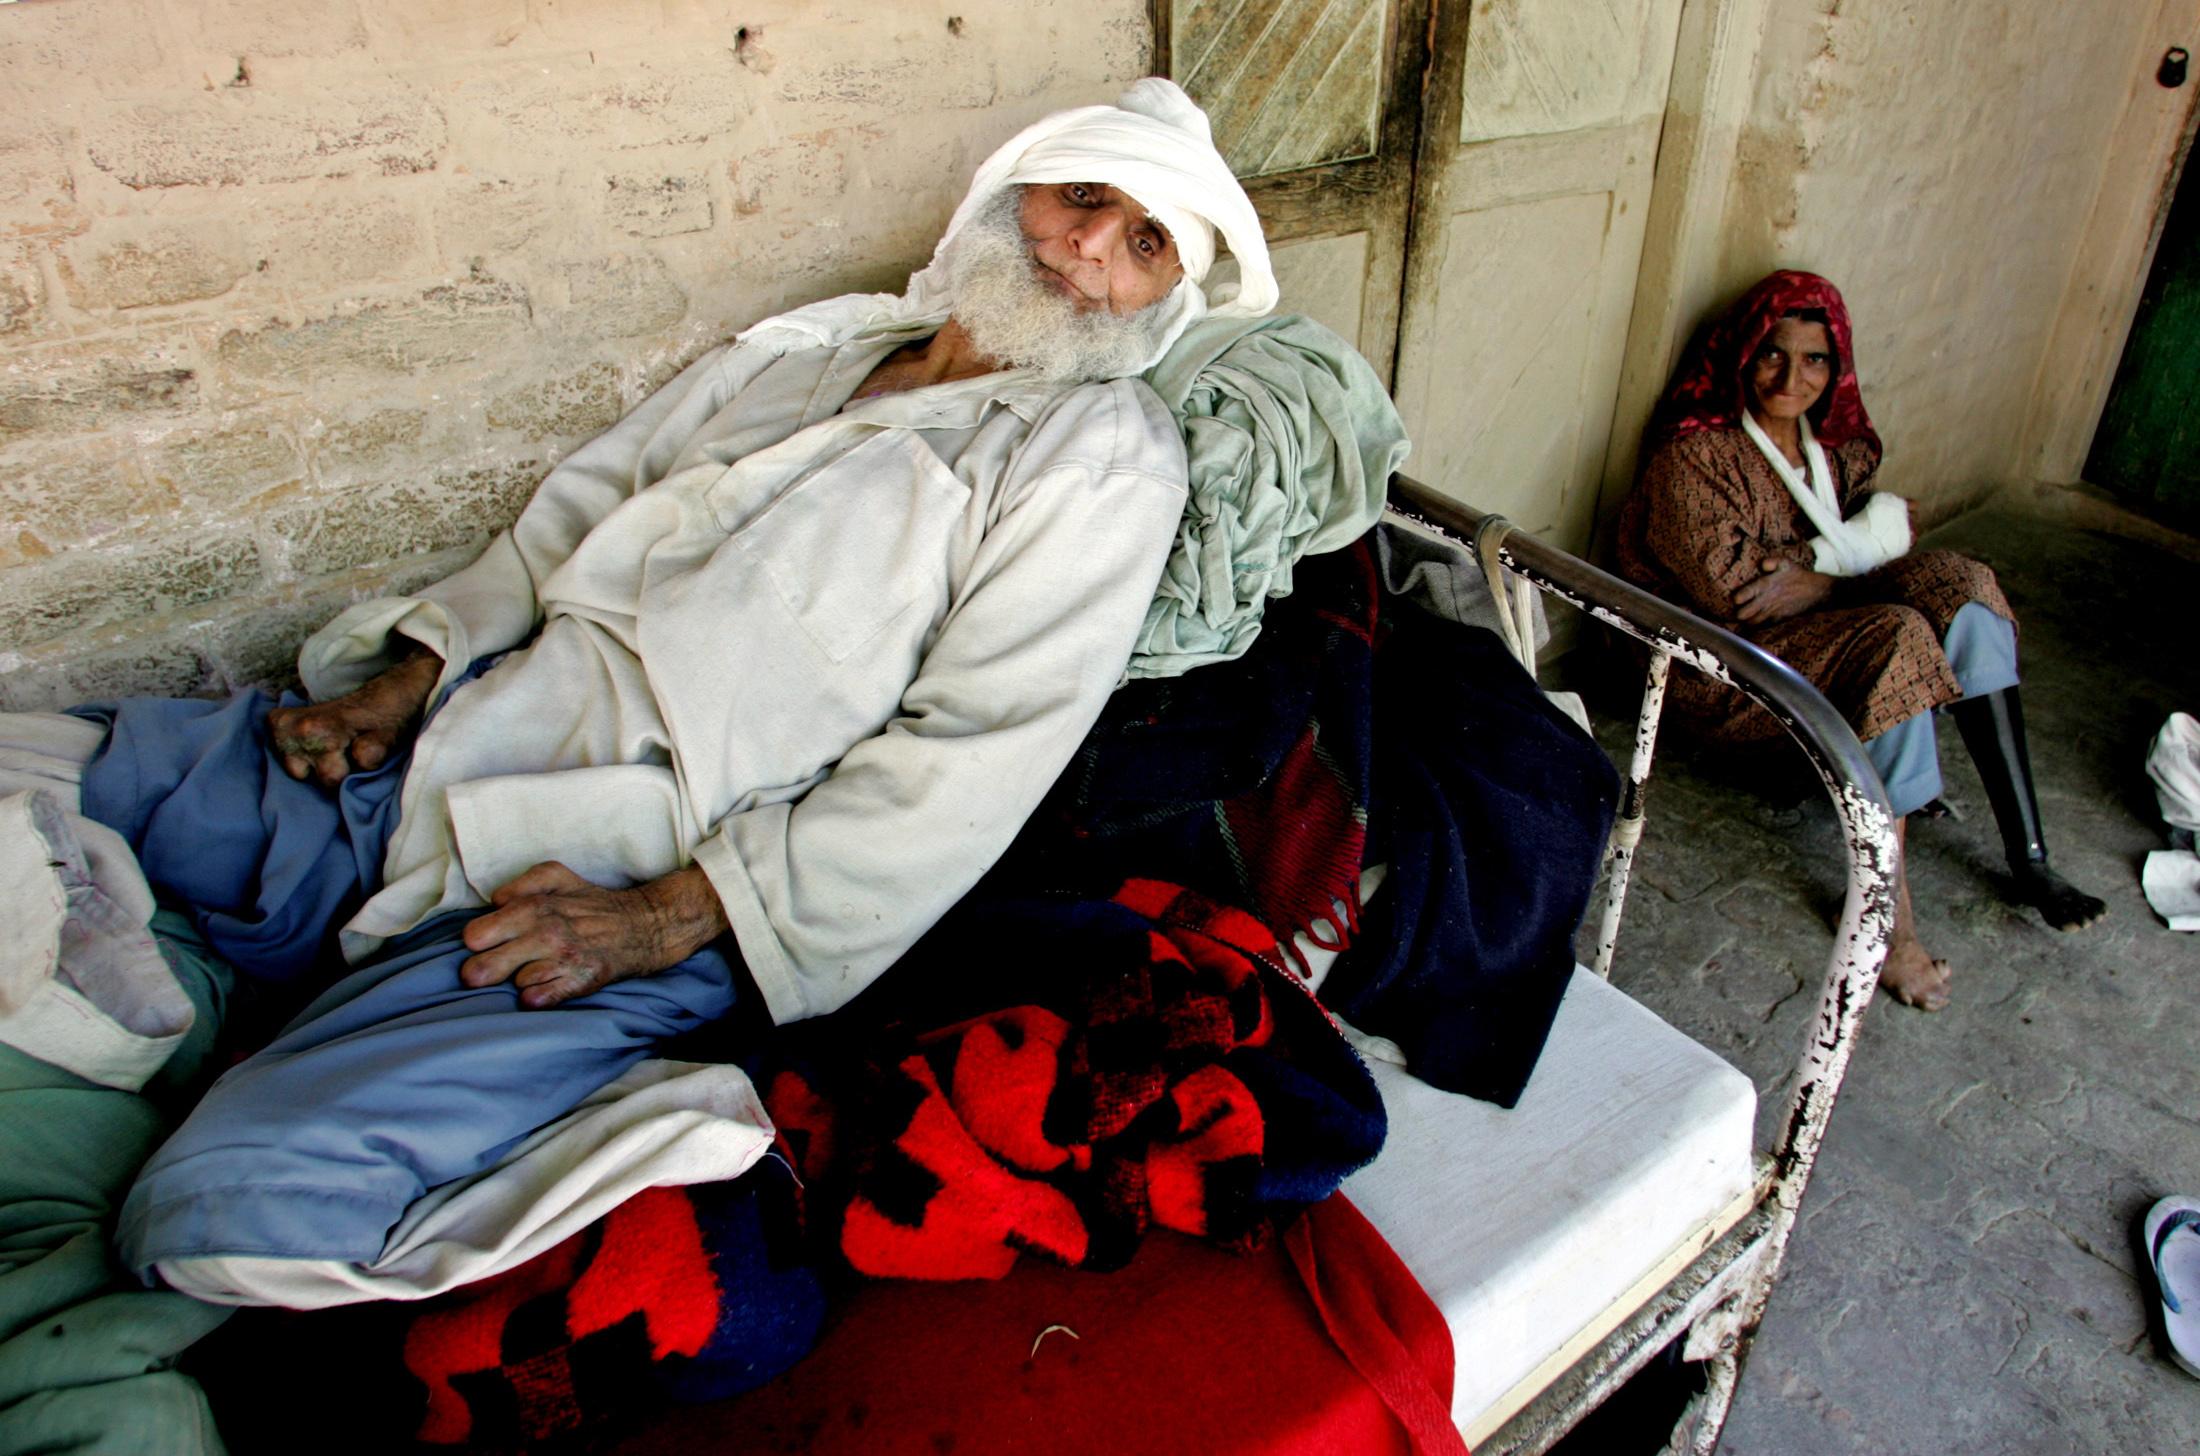 Leprosy patient Fath Choopan rests on a bed at a leprosy home in Nigeen on the outskirts of Srinagar, India, on September 16, 2005. Choopan and other patients are treated like untouchables. 